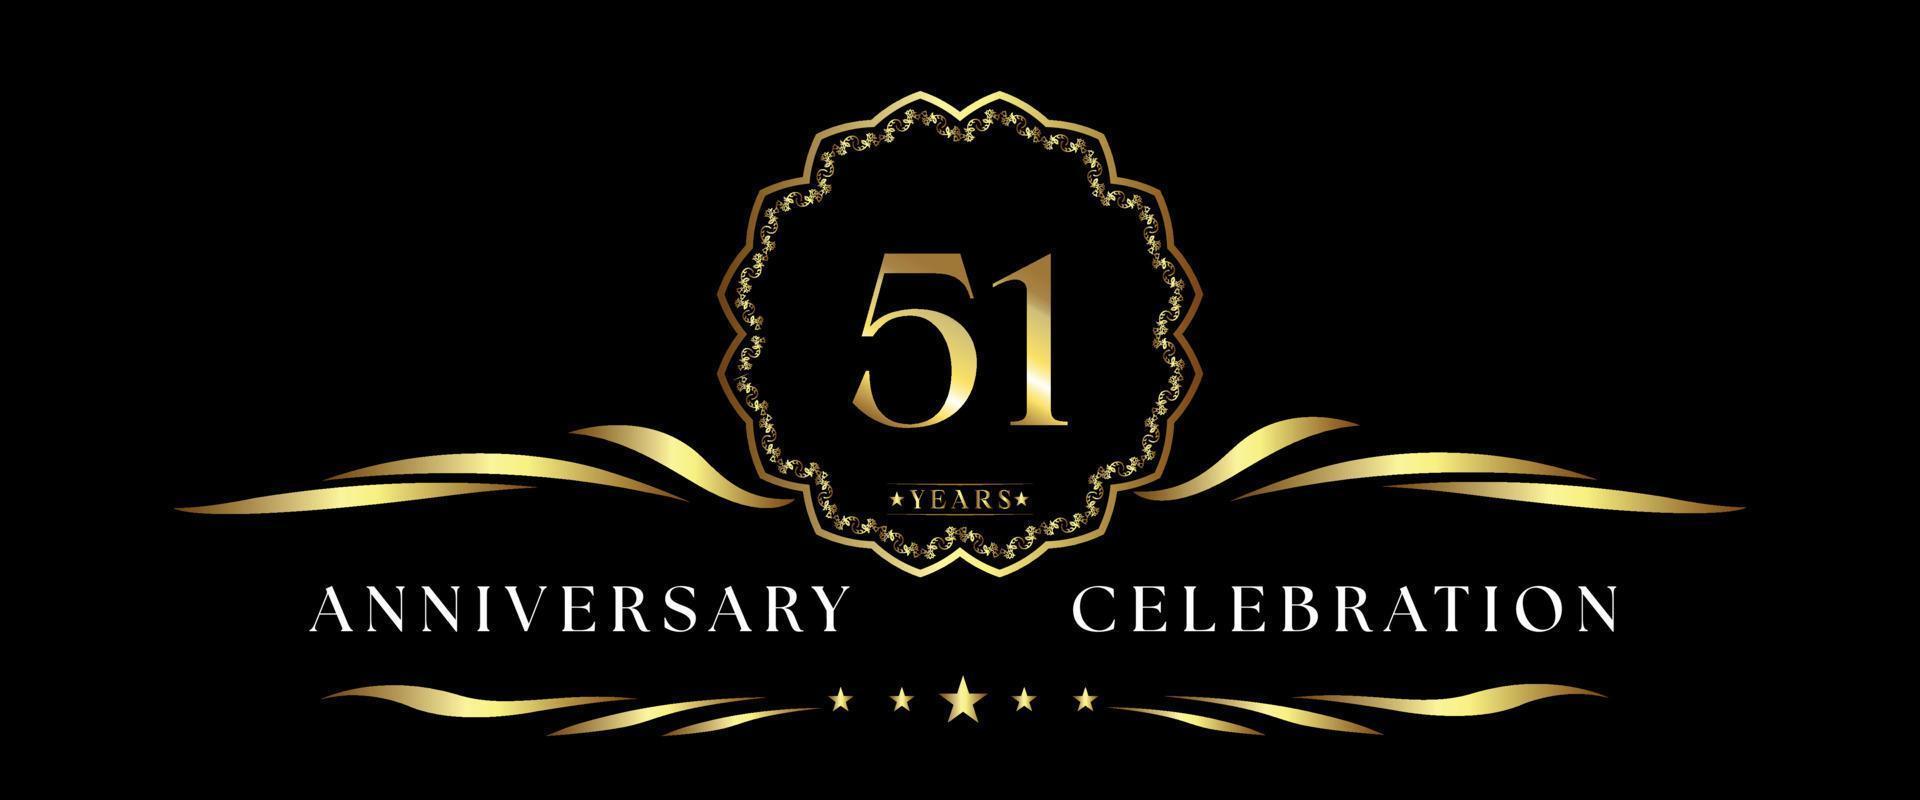 51 years anniversary celebration with gold decorative frame isolated on black background. Vector design for greeting card, birthday party, wedding, event party, ceremony. 51 years Anniversary logo.